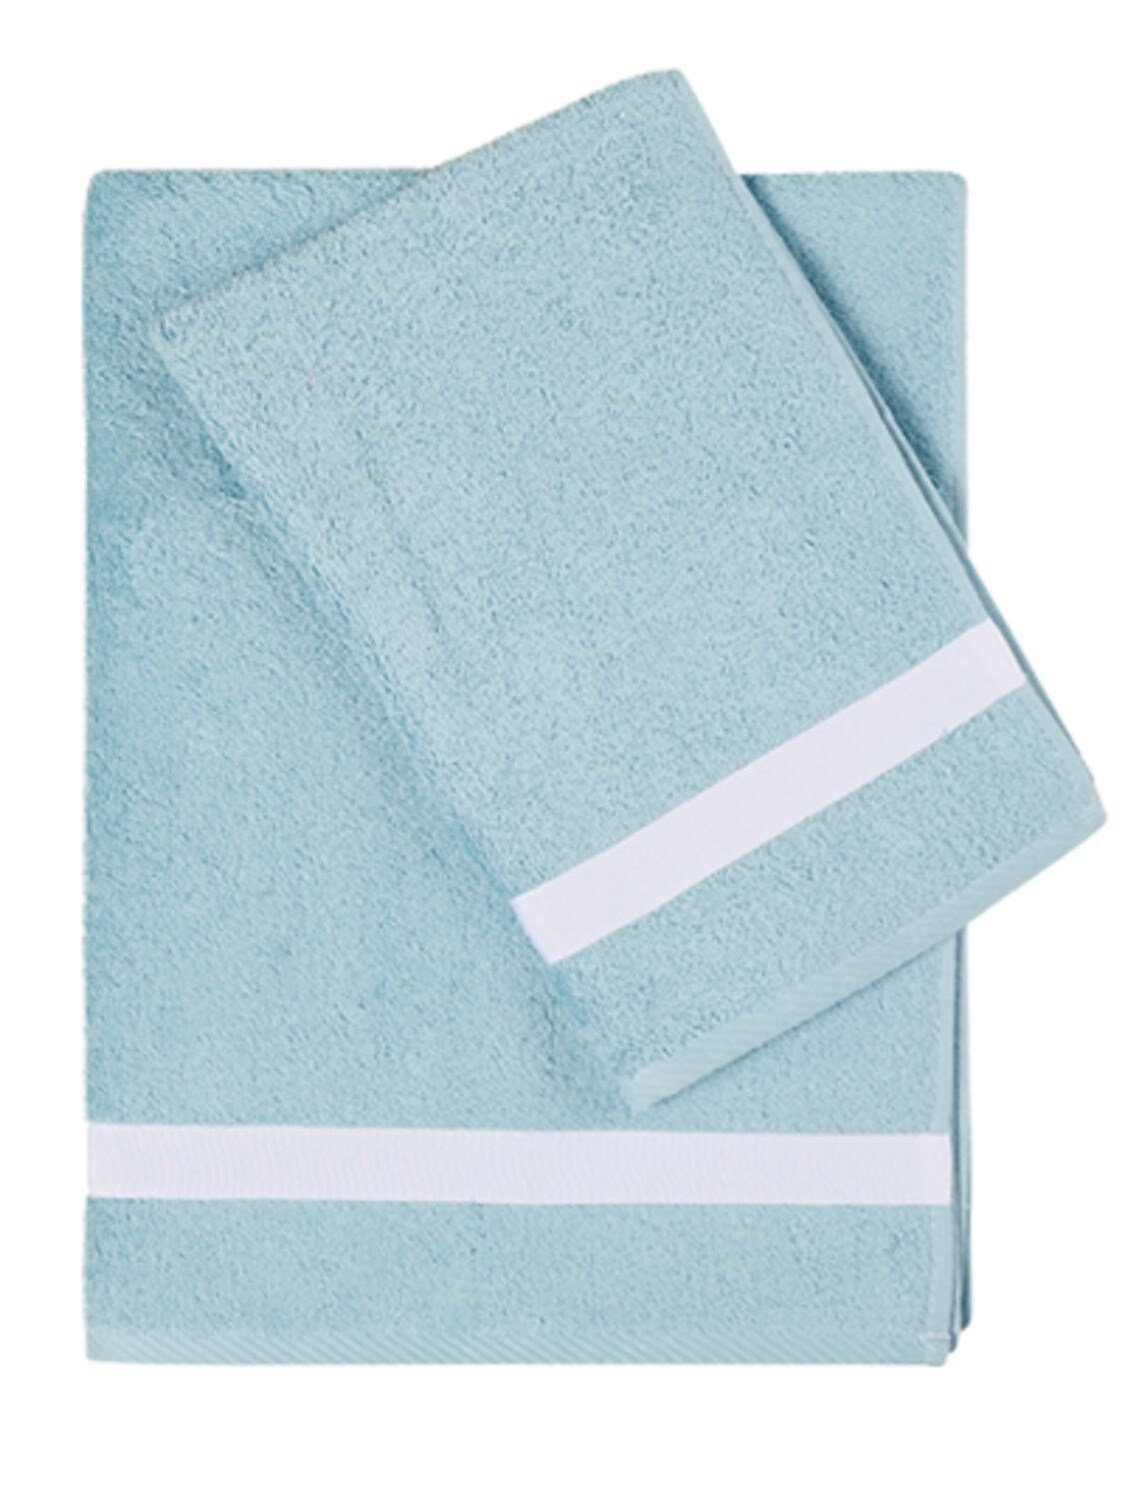 Alessandro Di Marco Set Of 2 Cotton Terrycloth Towels In Blue